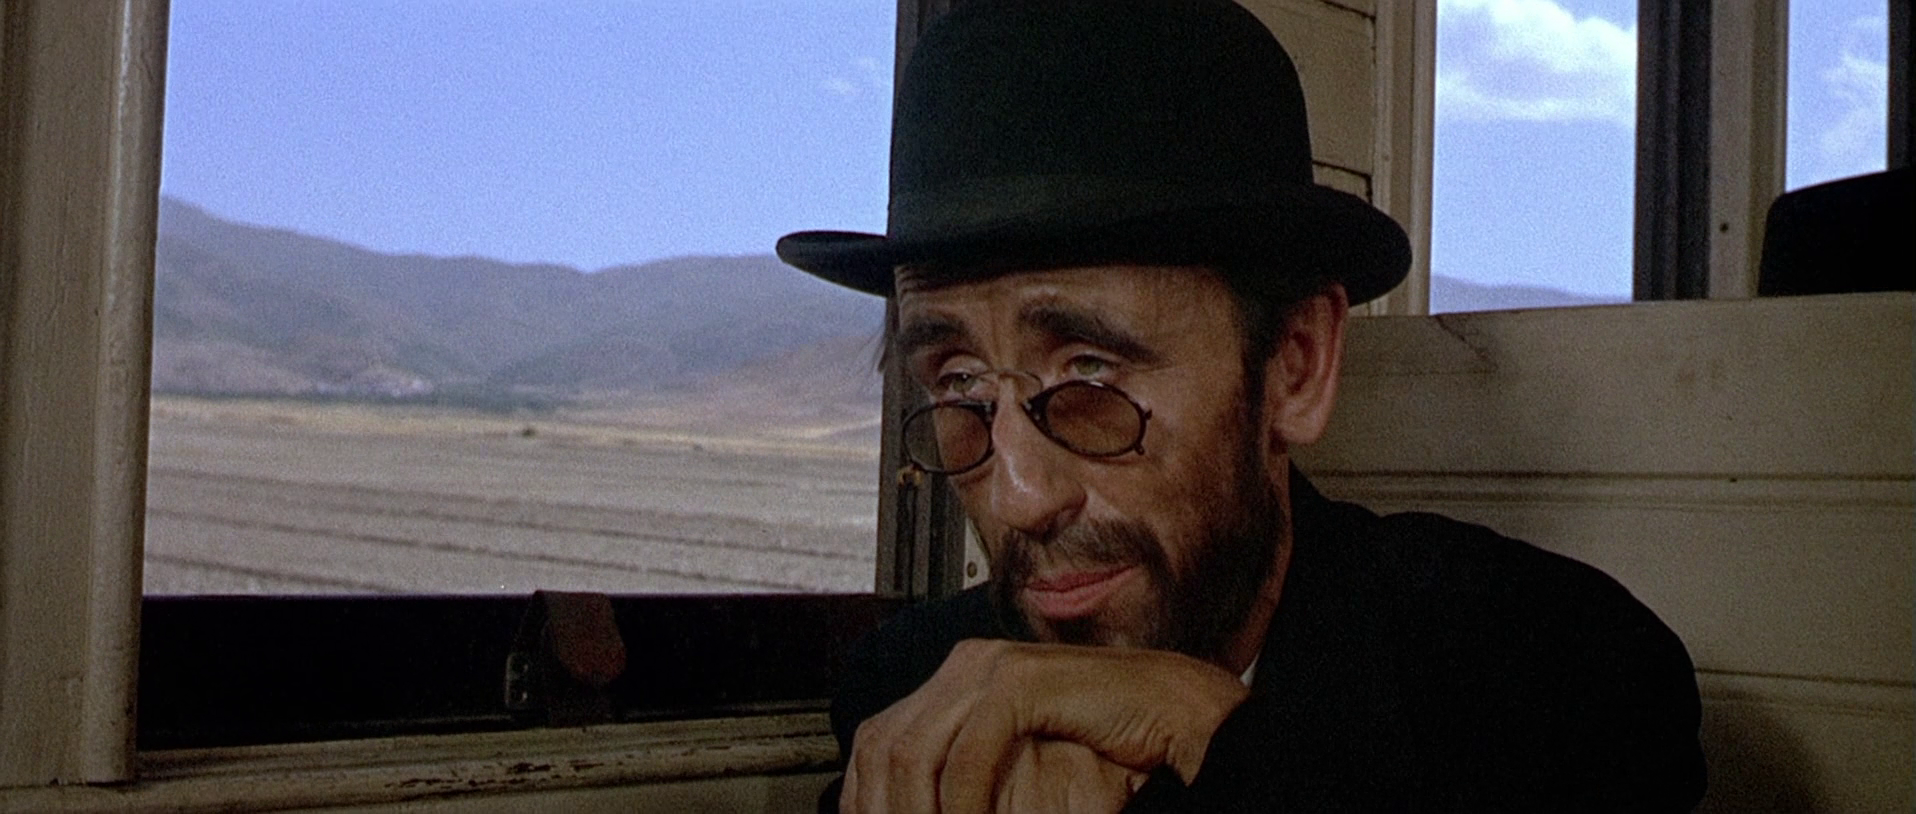 ƻ˫ڿ For.a.Few.Dollars.More.1965.1080p.BluRay.x264.DD5.1-FGT 20.14GB-2.png